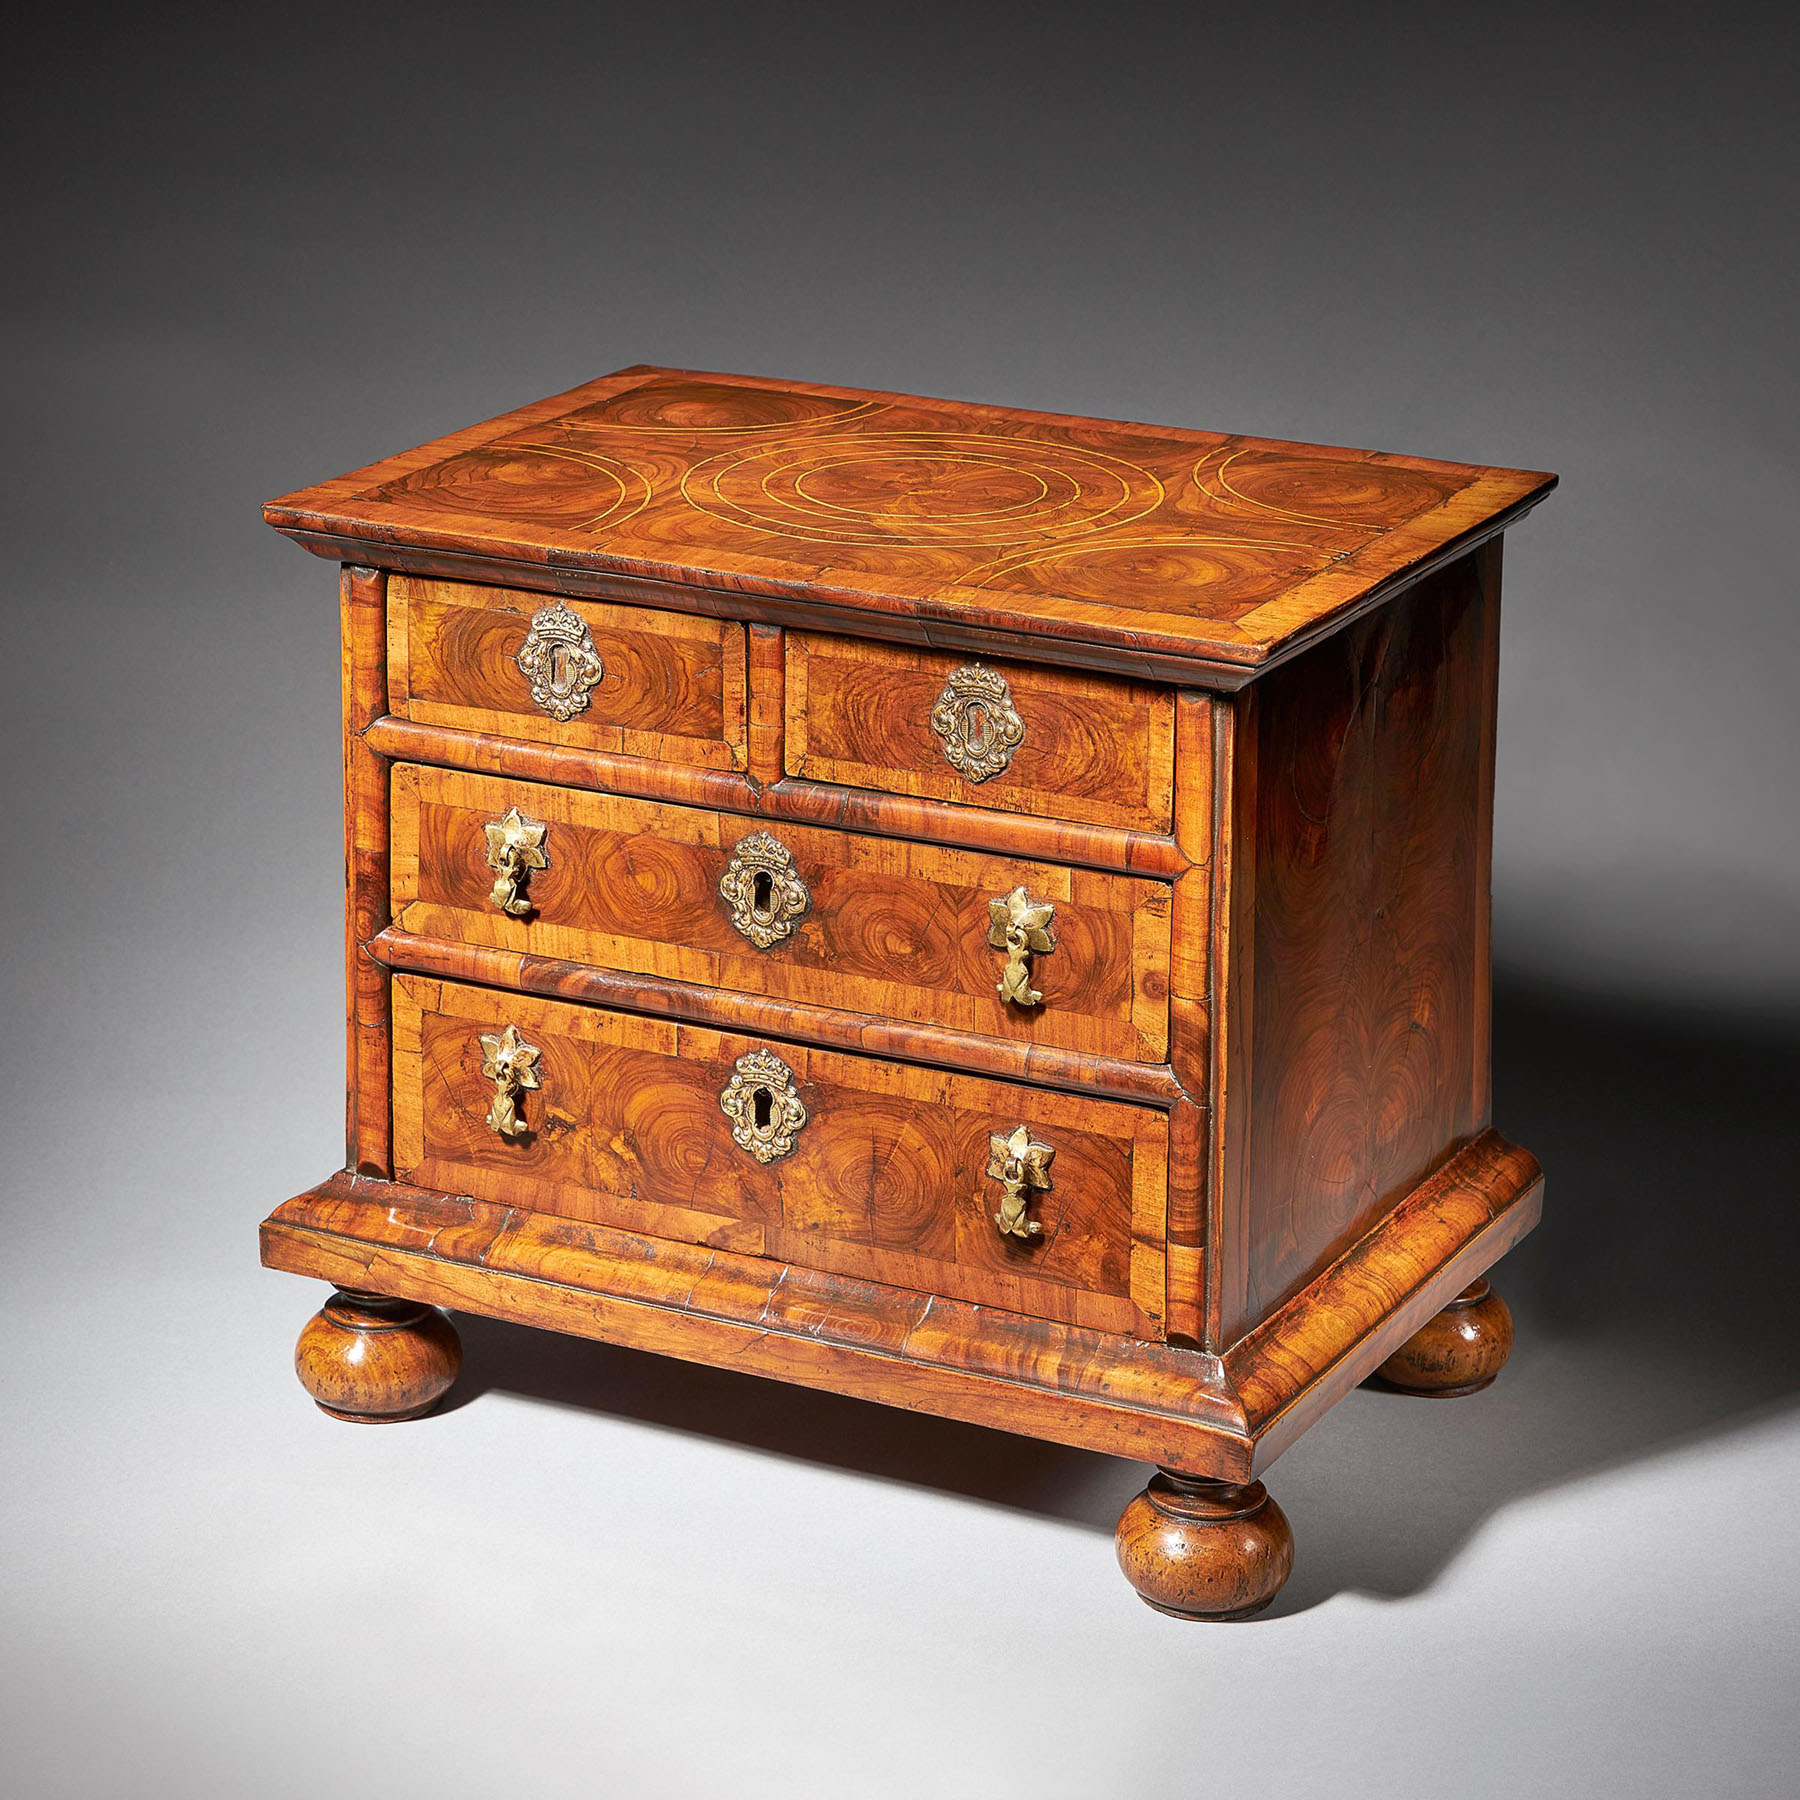 Diminutive 17th century William and Mary Olive Oyster Miniature Chest of Drawers 16